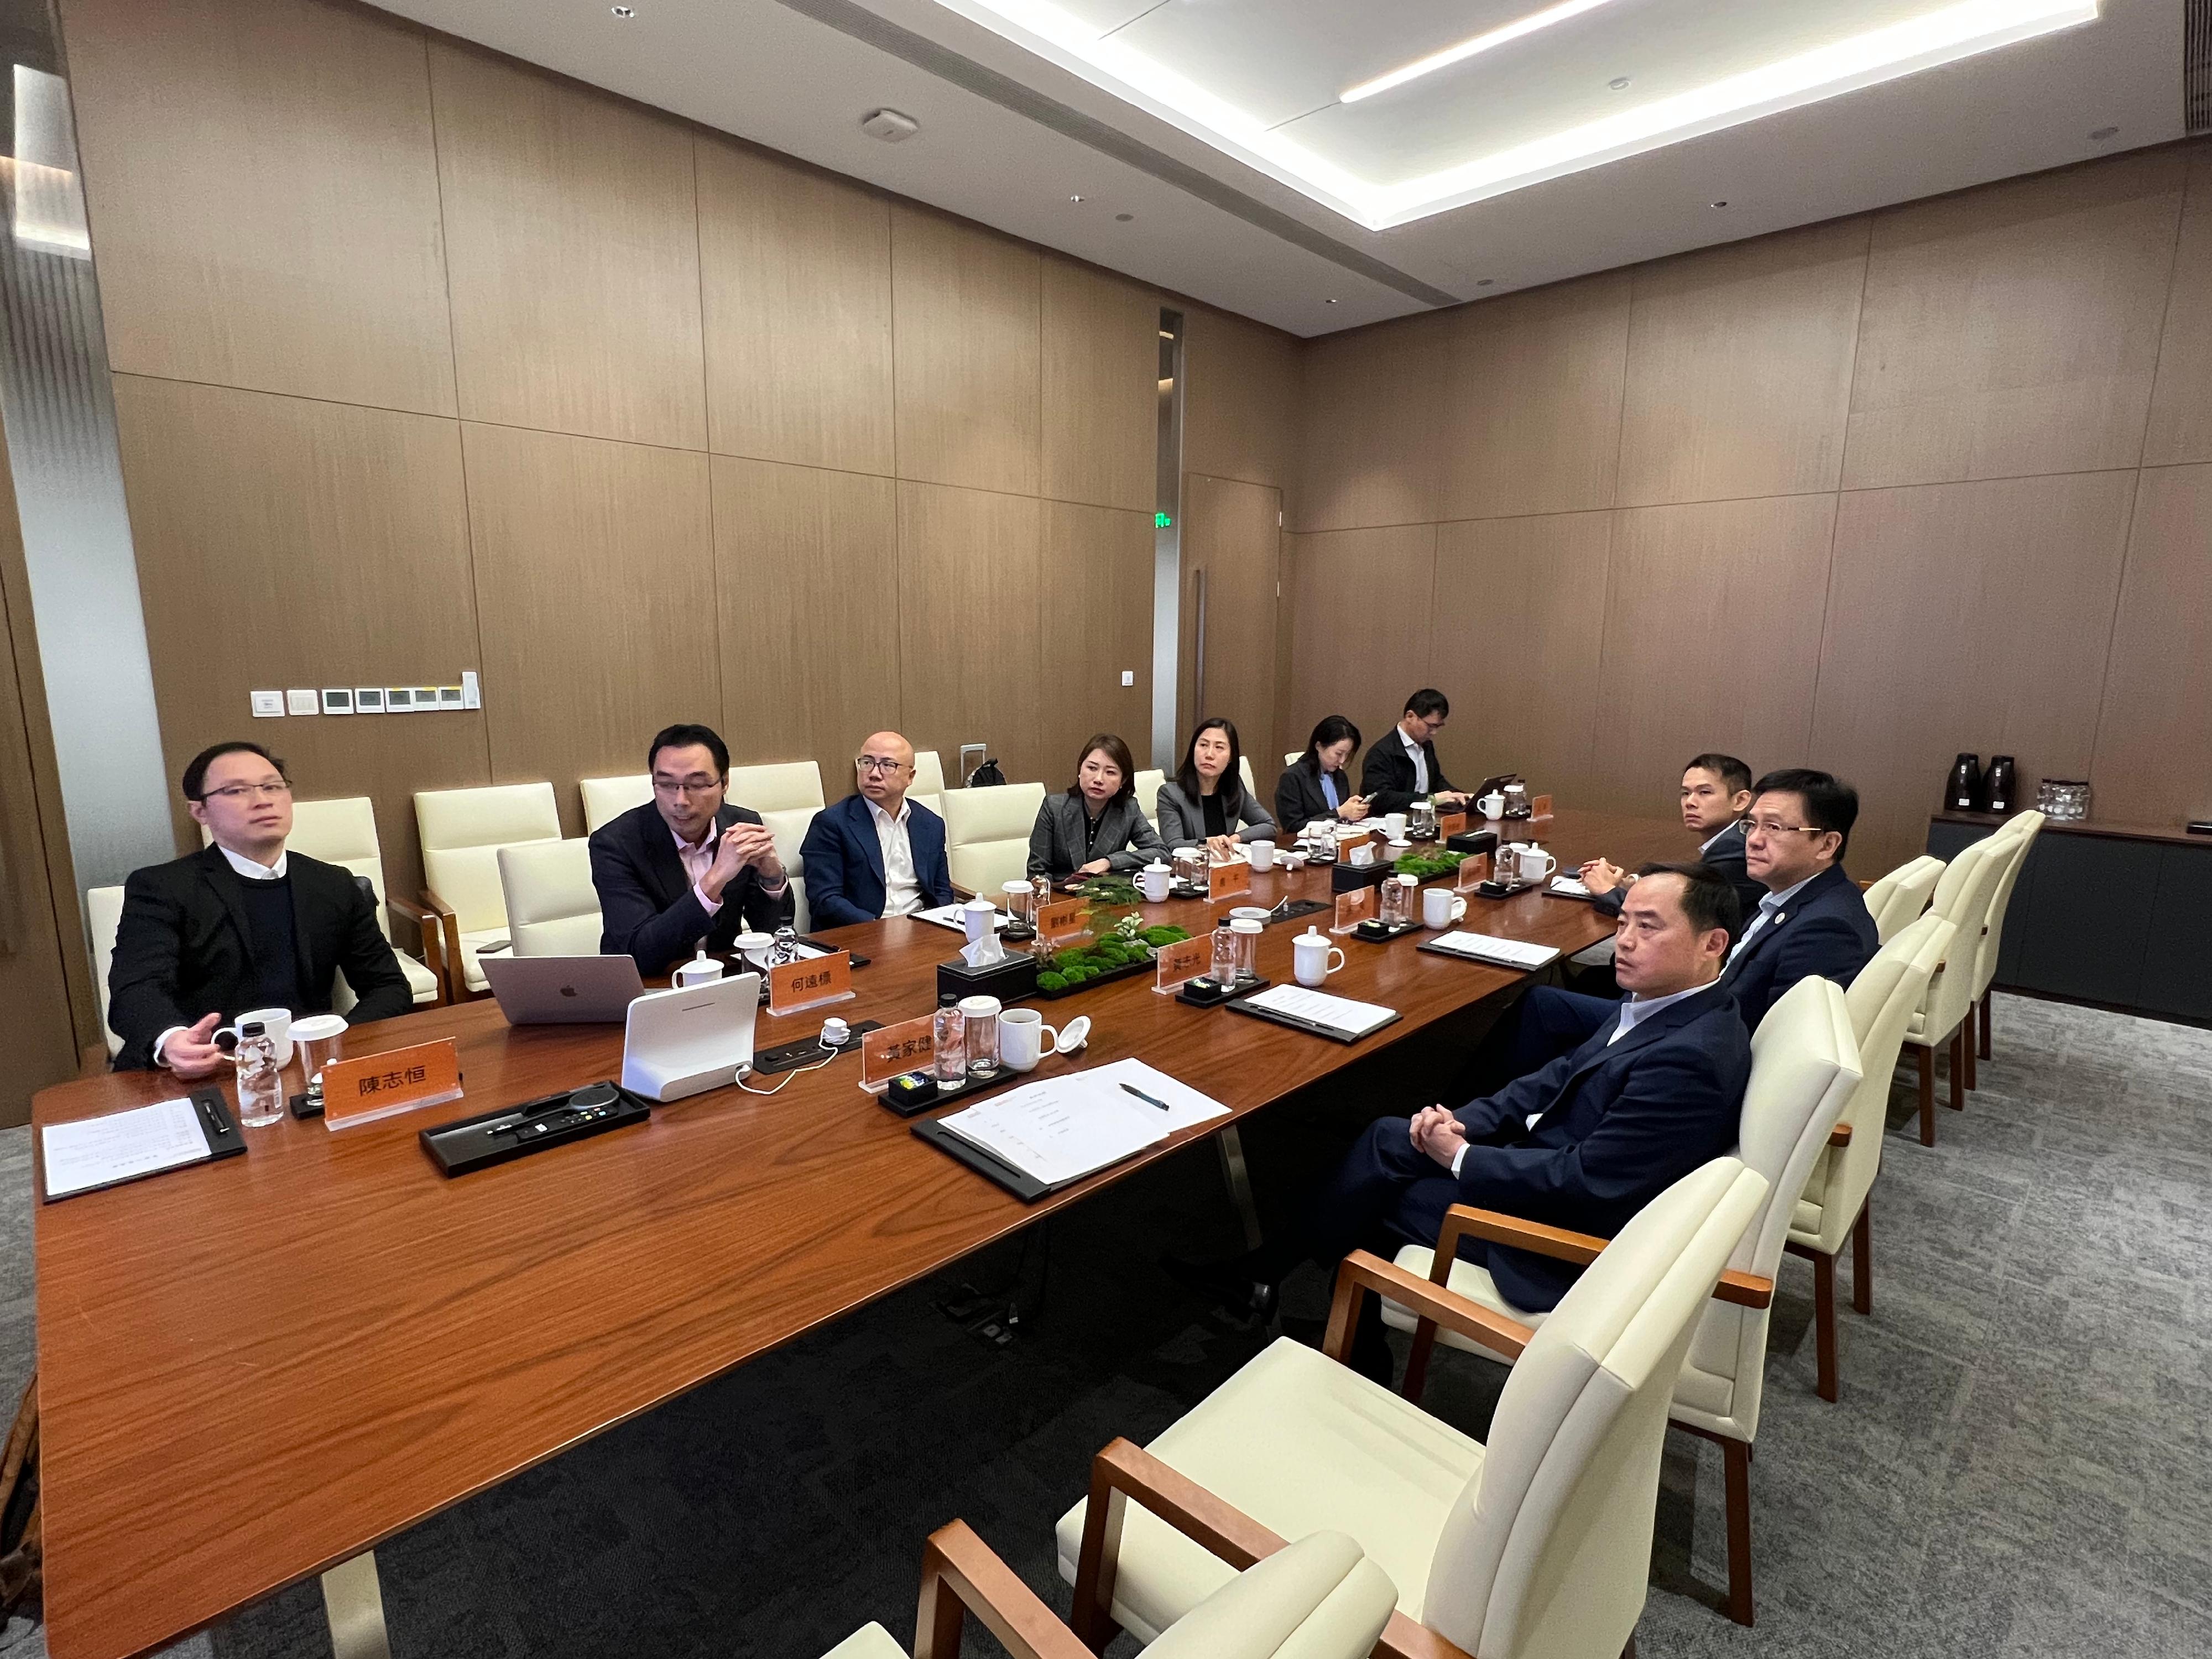 The Secretary for Innovation, Technology and Industry, Professor Sun Dong (second right), visits the Alibaba Cloud Valley Park in Hangzhou today (November 8), and is briefed by the park’s management on the business plan of the park and its latest development. Next to Professor Sun is the Government Chief Information Officer, Mr Tony Wong (third right).